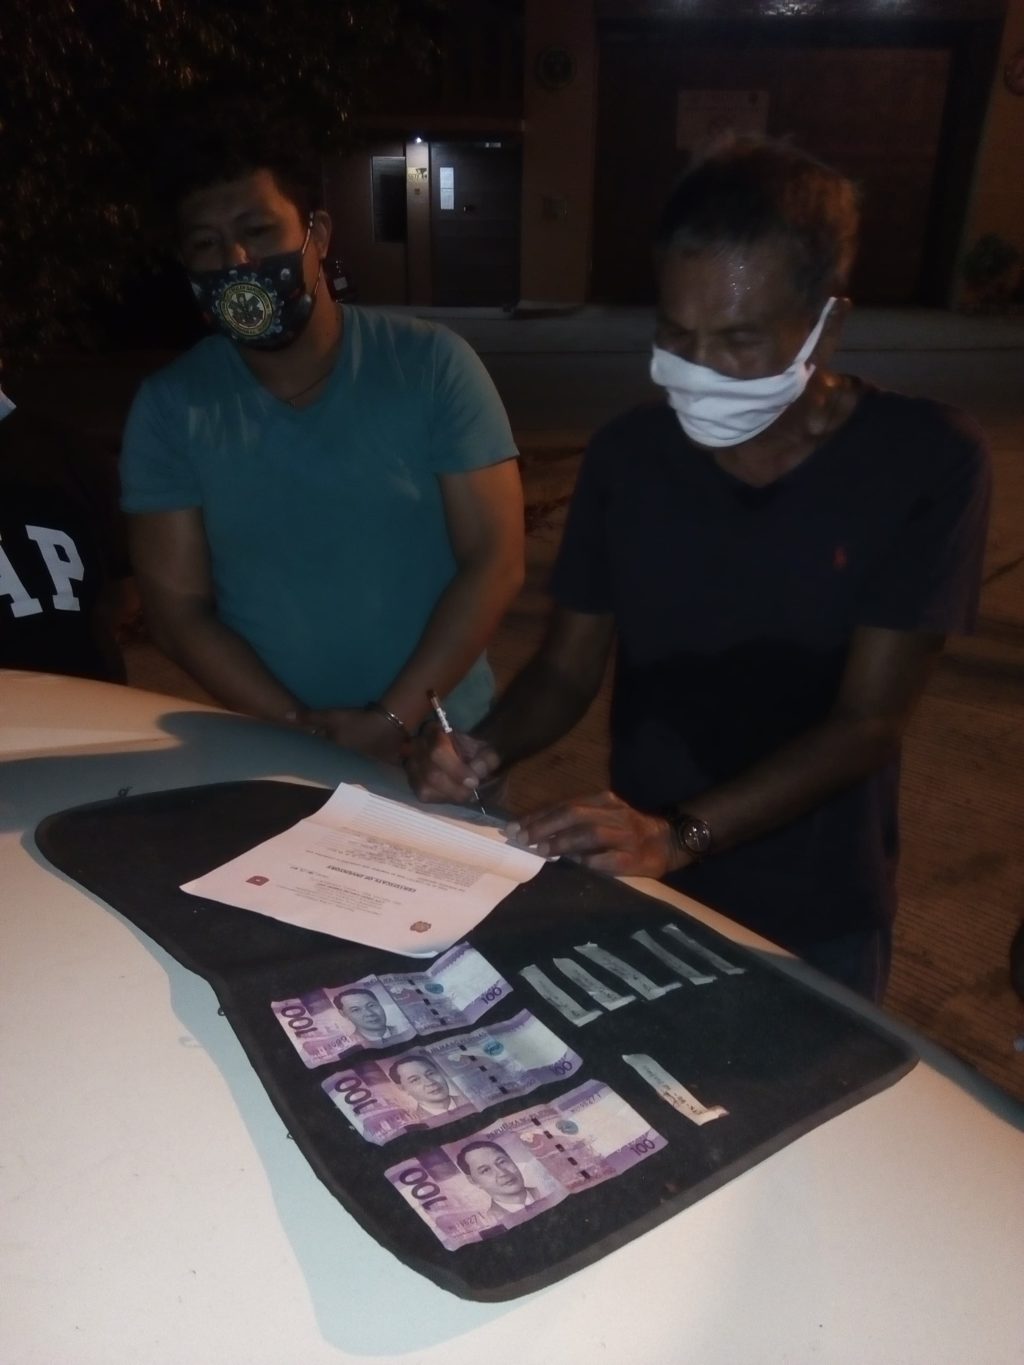 Iphigene Kangleon, a hospital worker, (left) is caught with 6 sachets of suspected shabu during a buy-bust operation in Barangay Jagobiao in Mandaue City at past 8 p.m. on May 2, 2020. |Norman Mendoza